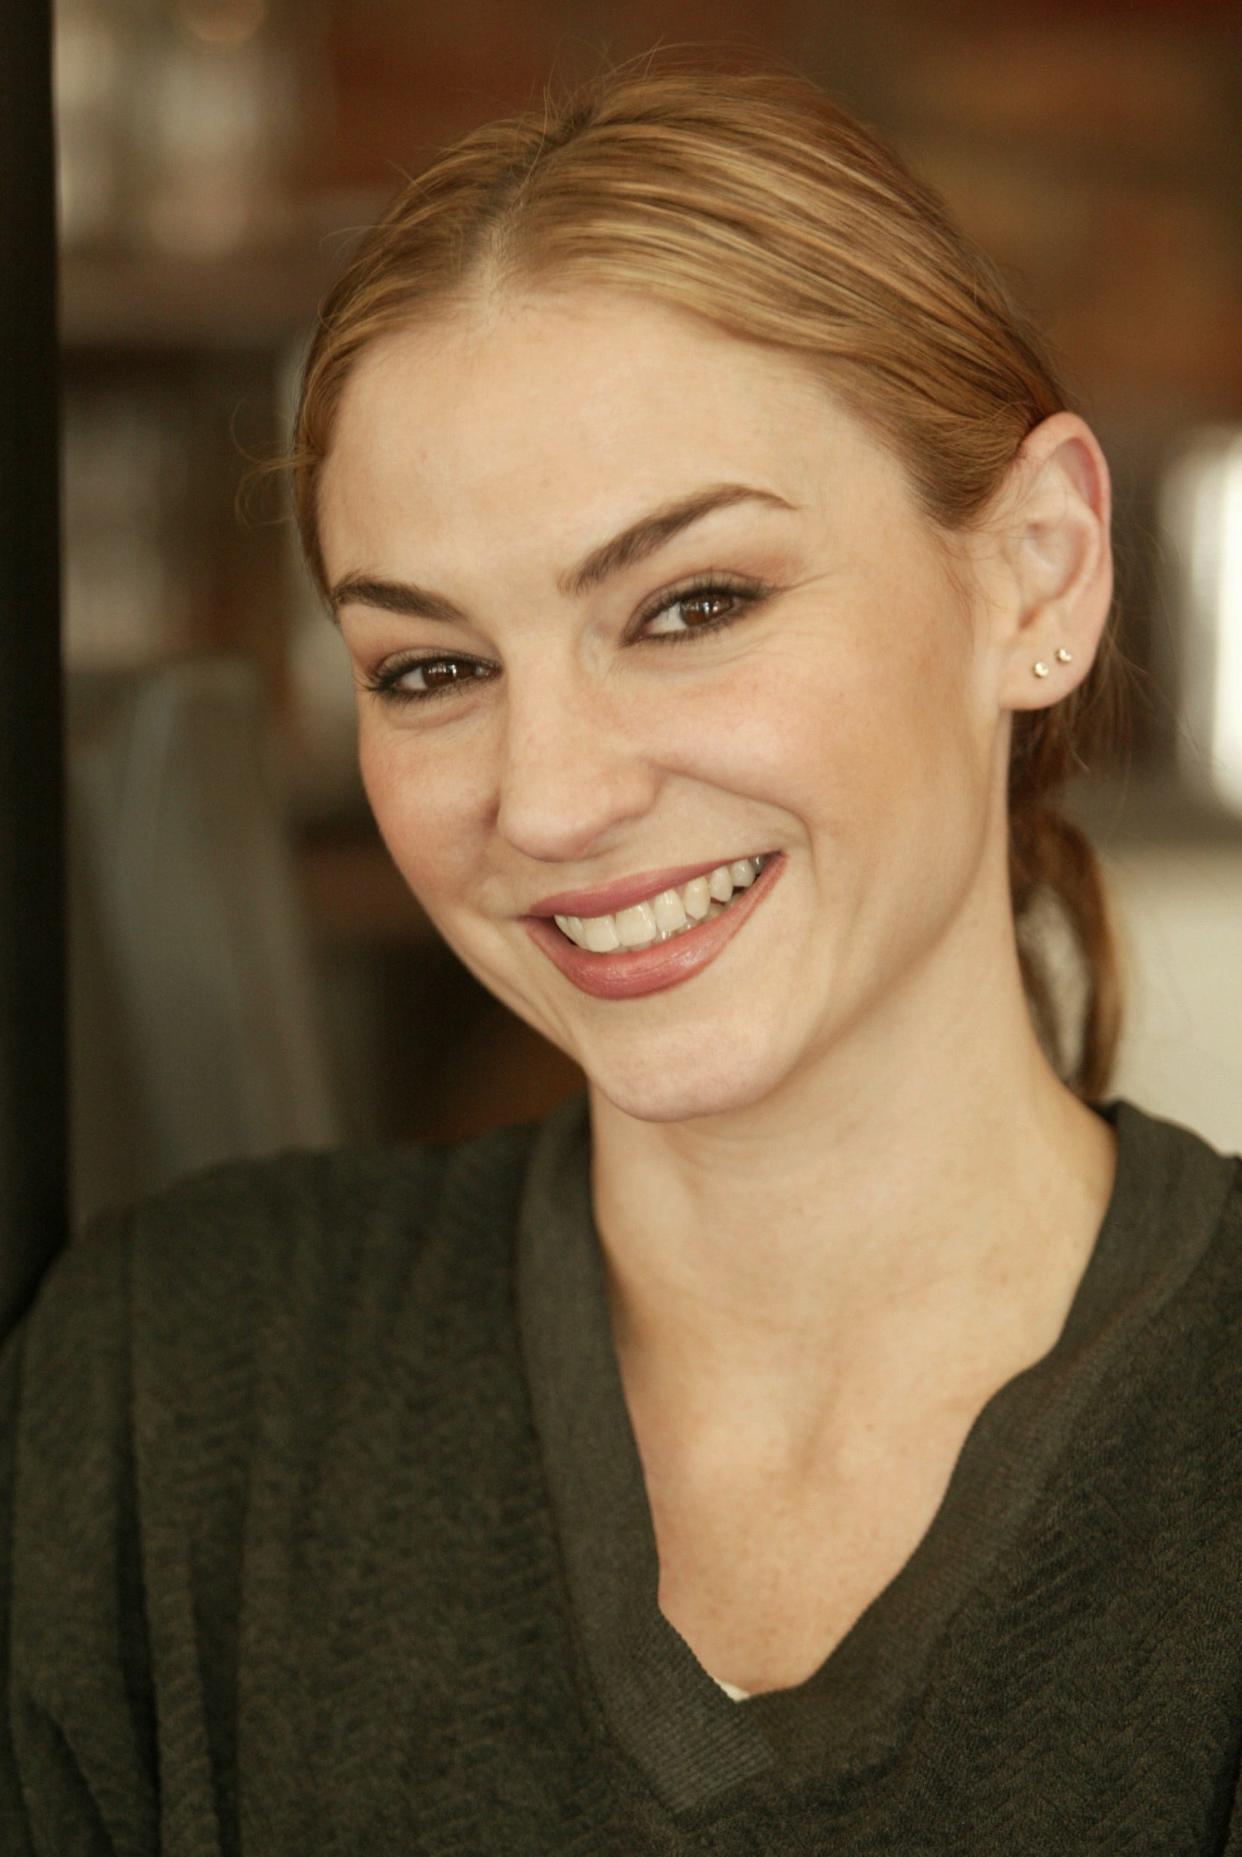 Actress Drea de Matteo, who starred in "The Sopranos," is pictured at a New York City bistro in 2004.